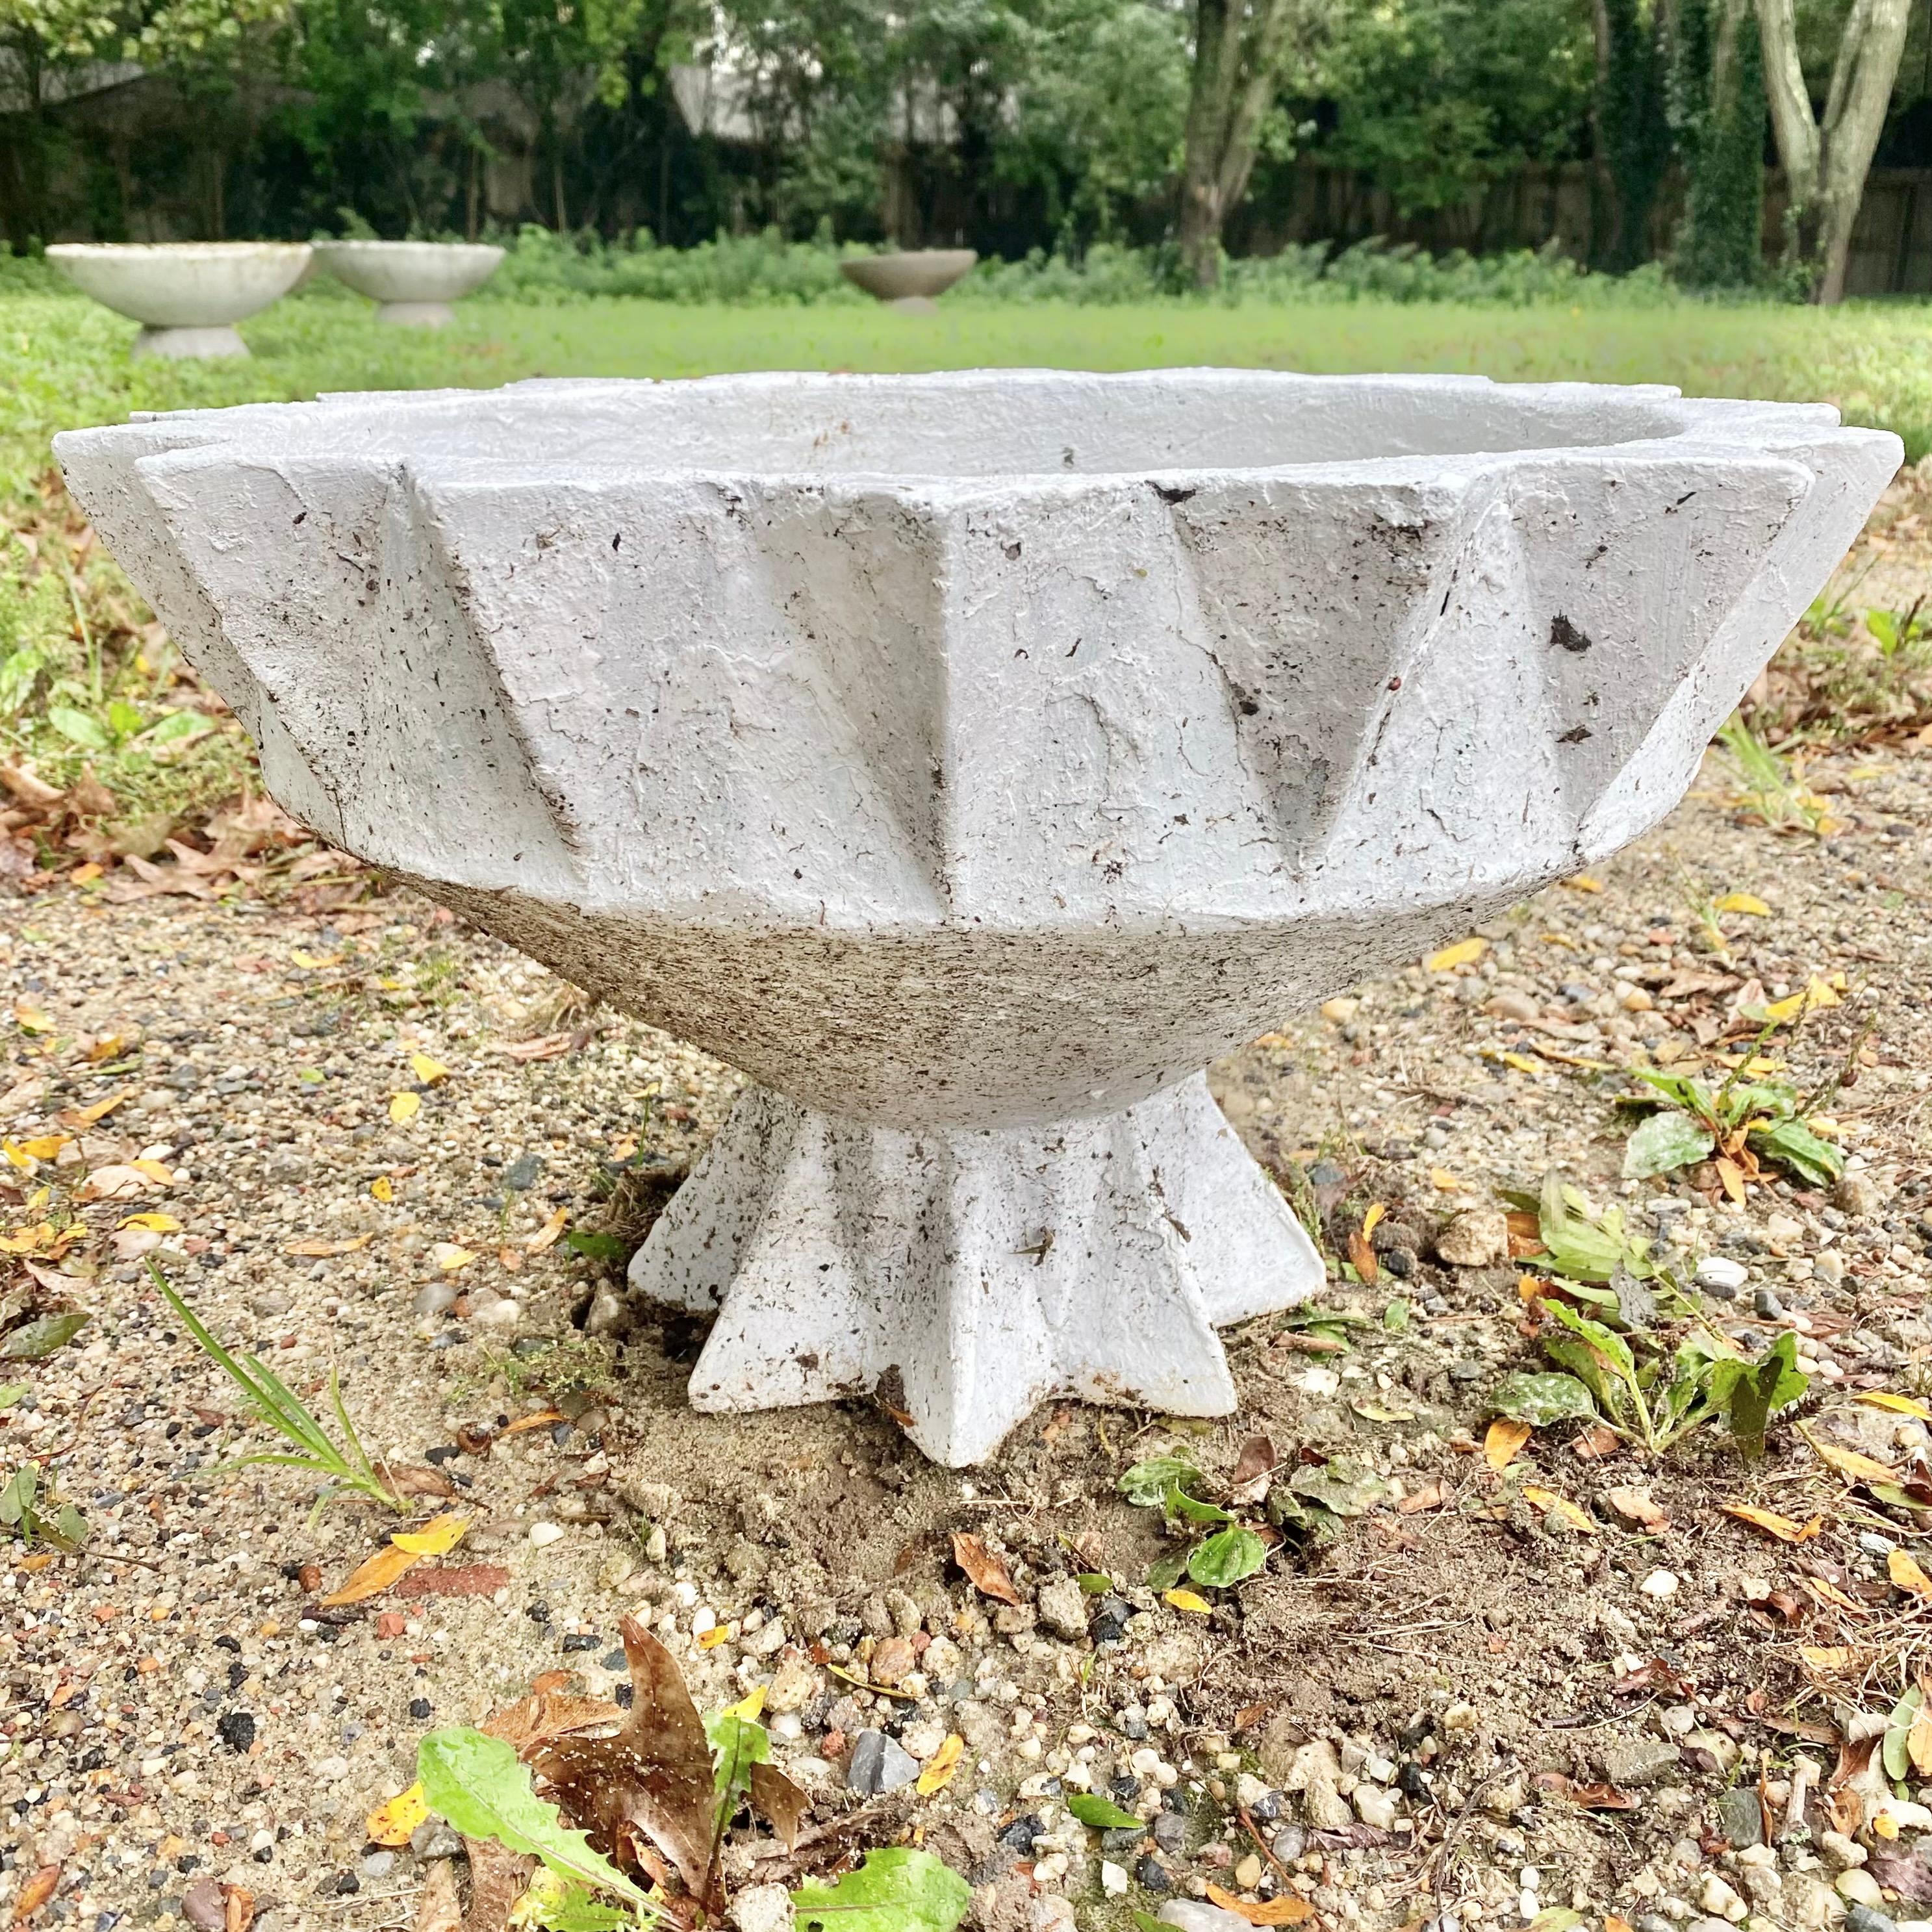 Unique concrete planters by Swiss architect Willy Guhl. Planter in the shape of a chalice. Especially unique in that the base matches the top with pointed facets. Great vintage condition. Two available in different patinas: one dark, one light.